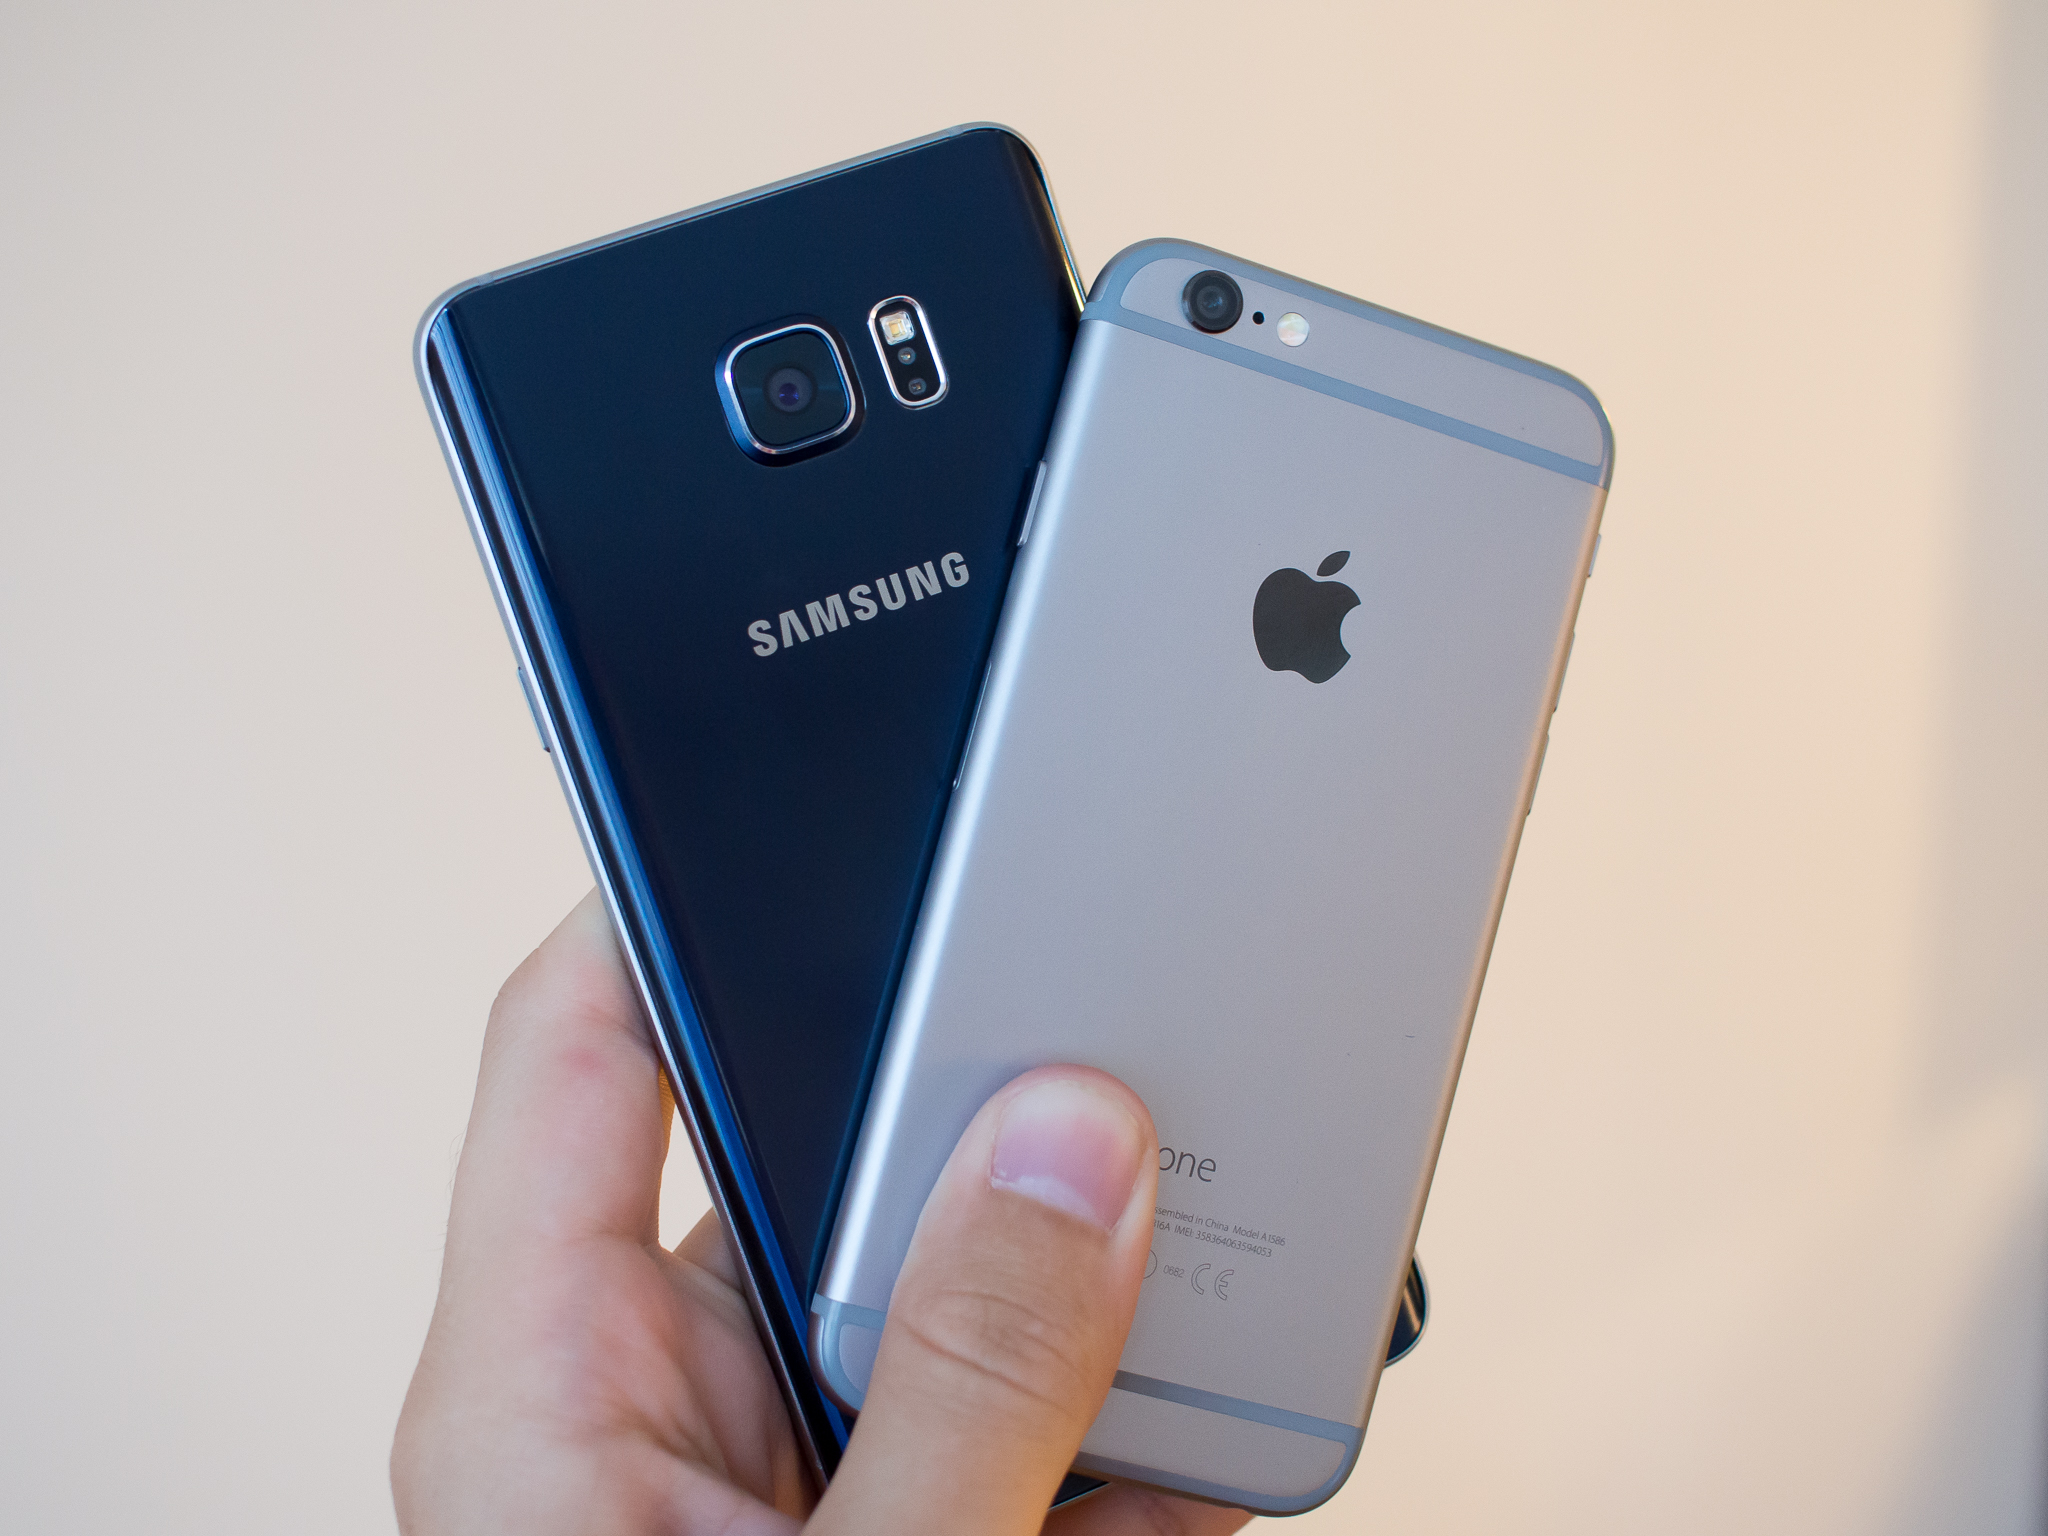 Galaxy Note 5 and iPhone 6